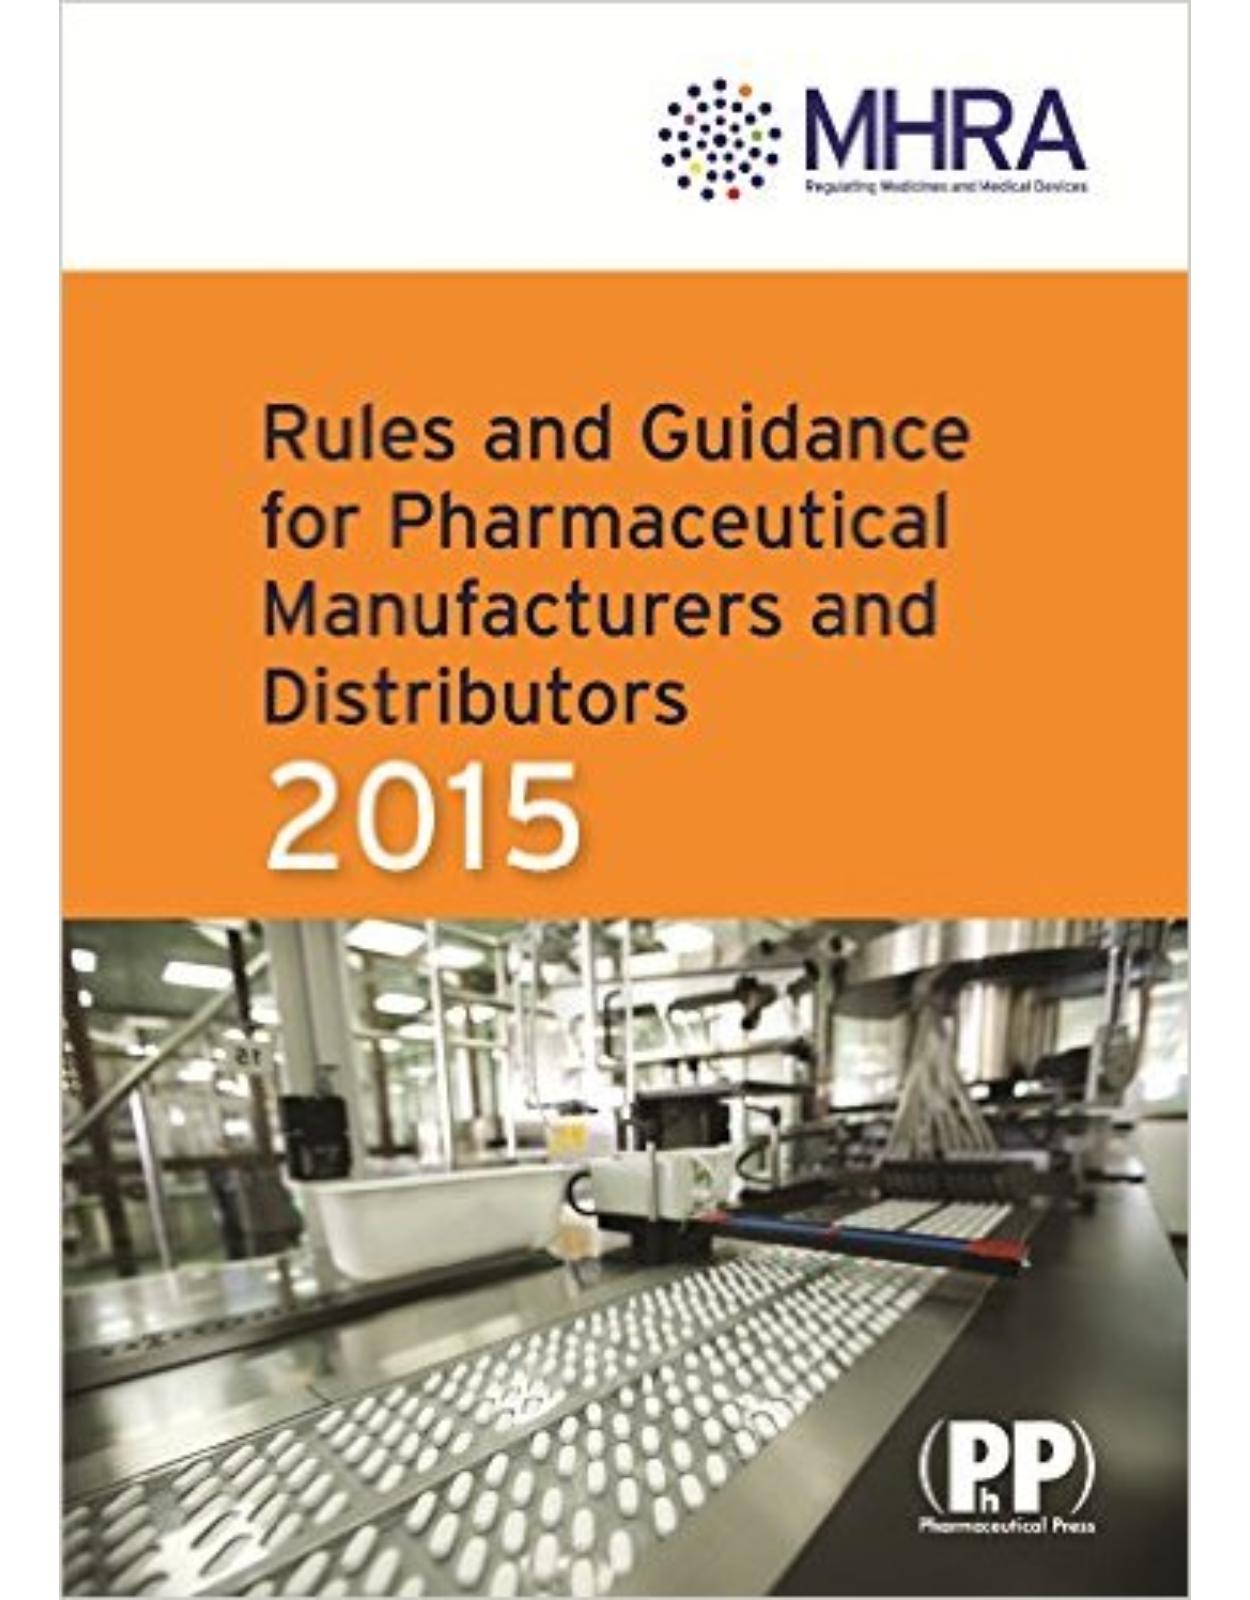 Rules and Guidance for Pharmaceutical Manufacturers and Distributors 2015: The Orange Guide 1st Edition